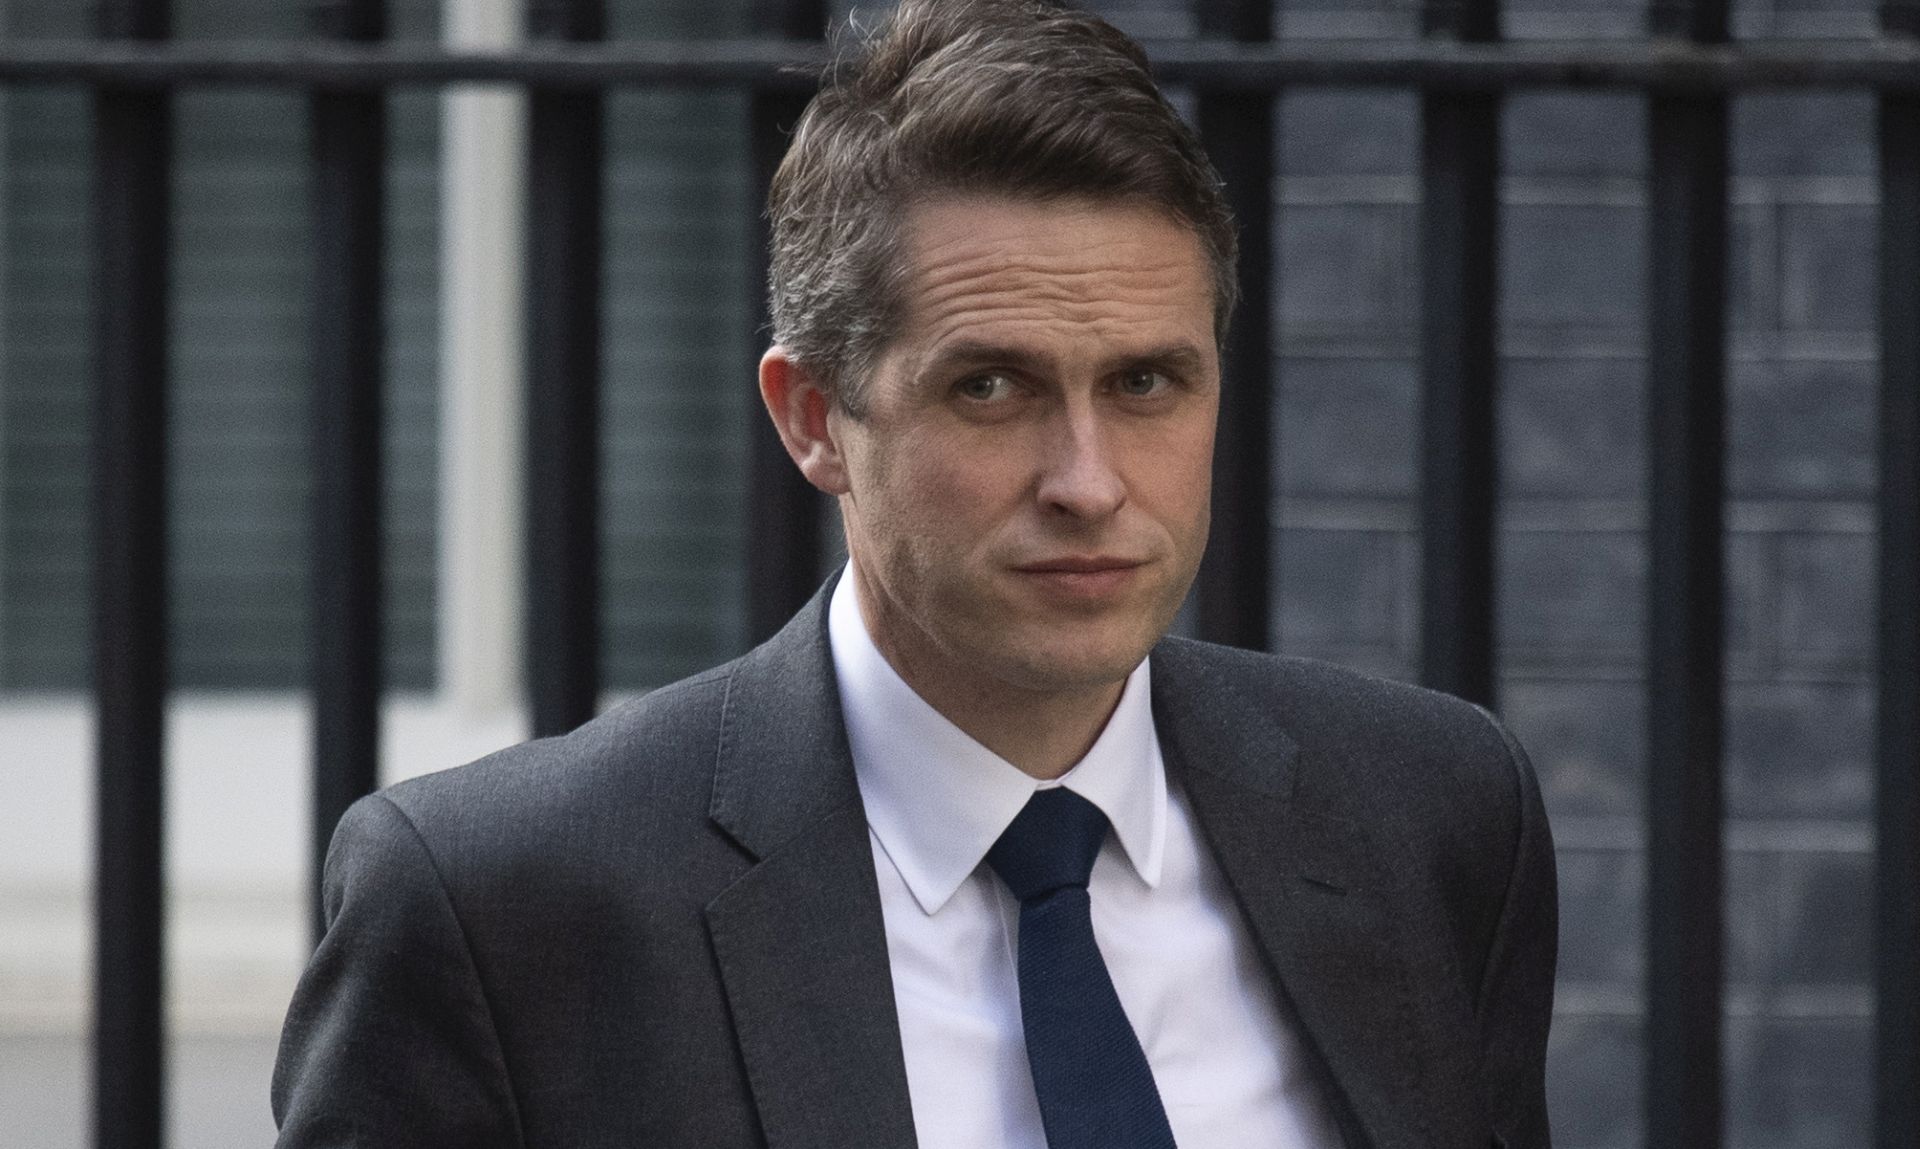 epa07540811 (FILE) - British Defence Secretary Gavin Williamson leaves Downing Street following an eight hour cabinet meeting in London, Britain, 02 April 2019, reissued 01 May 2019. Media reports on 01 May 2019 state that British Prime Minister Theresa May has sacked Gavin Williamson following an investigation into the leak of information from the National Security Council.  EPA/WILL OLIVER